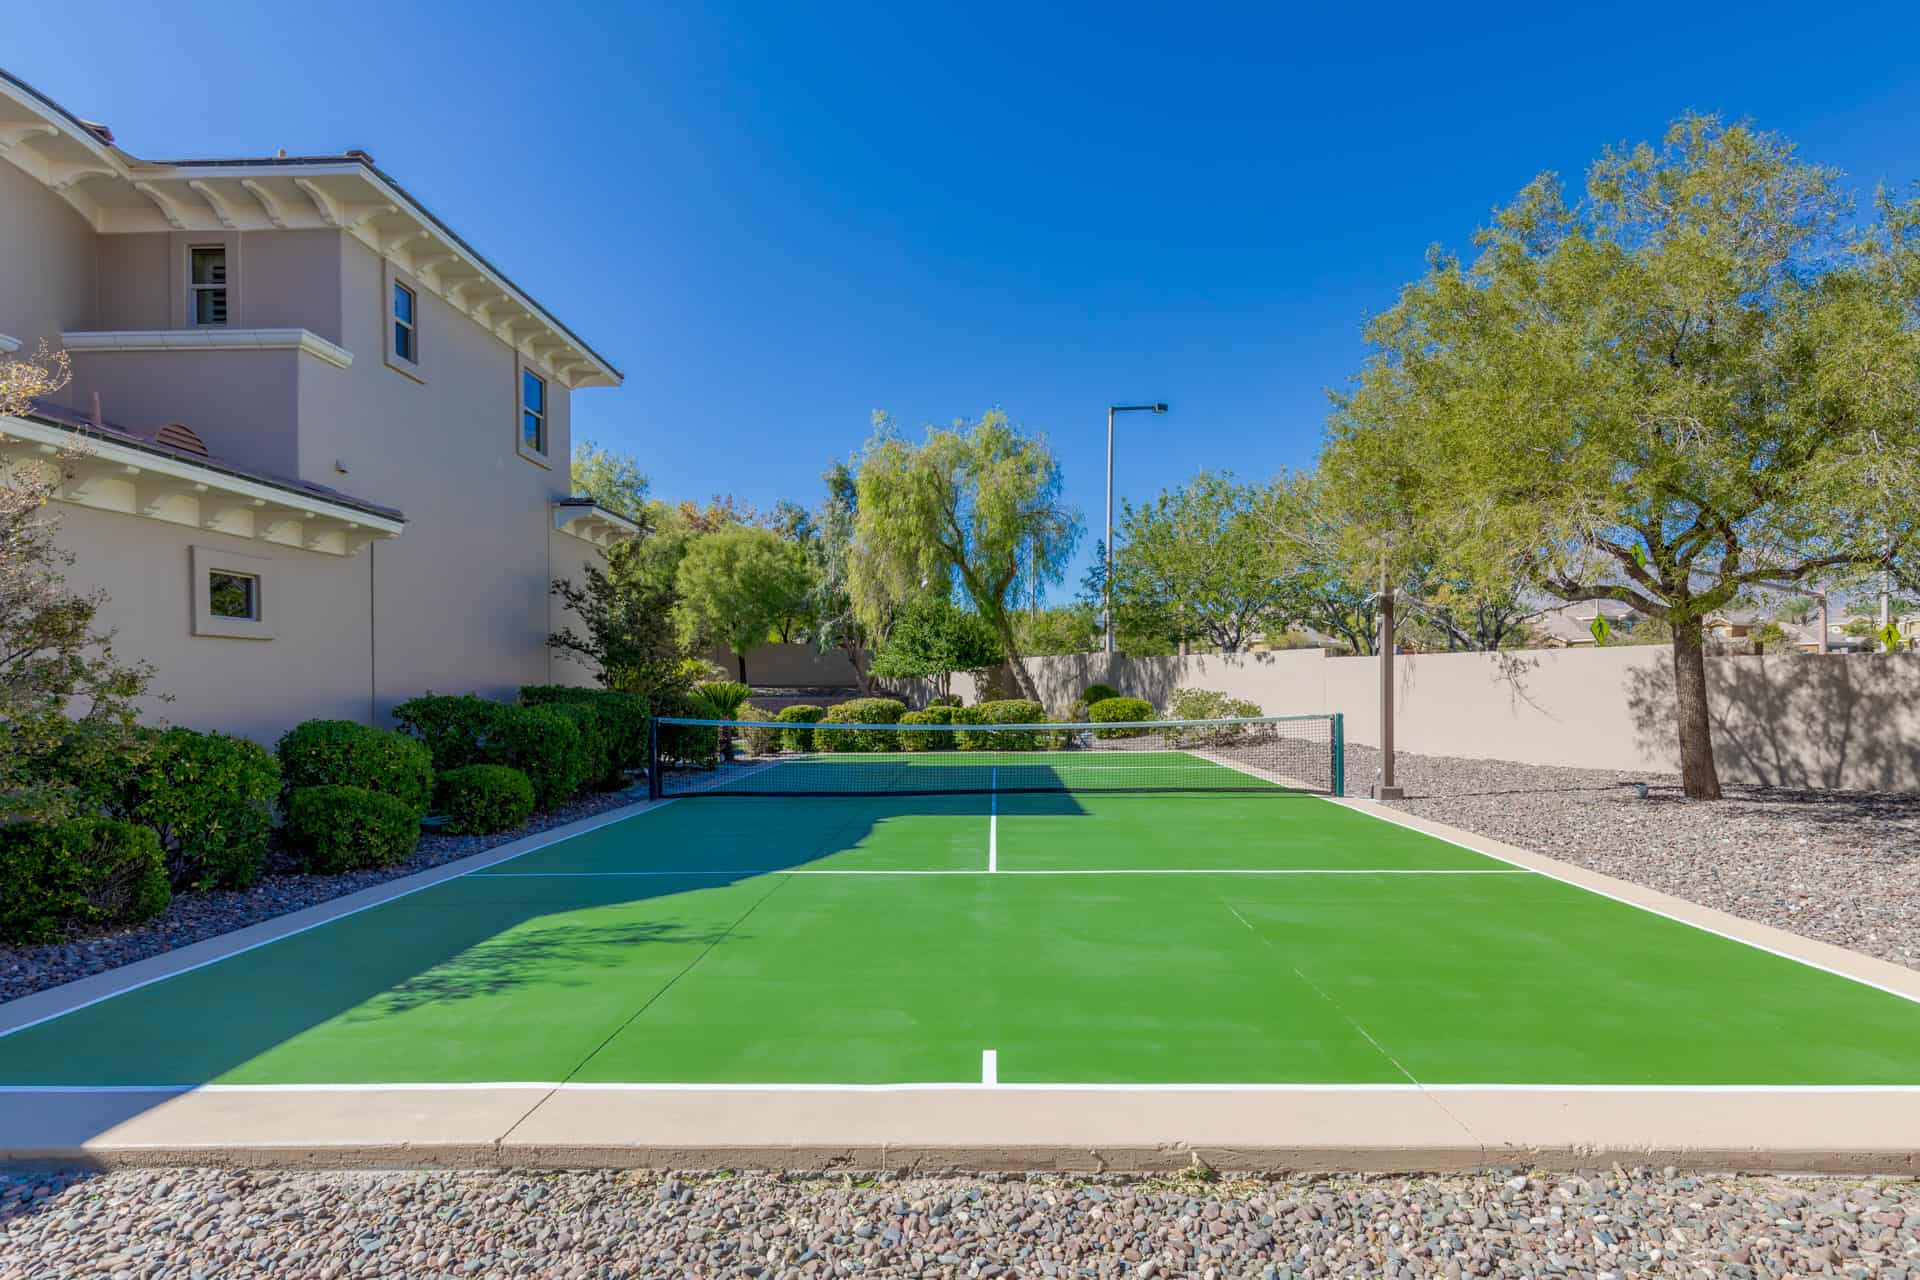 On the North side of the property you'll find a private tennis court, which has been recently repainted and includes floodlights.